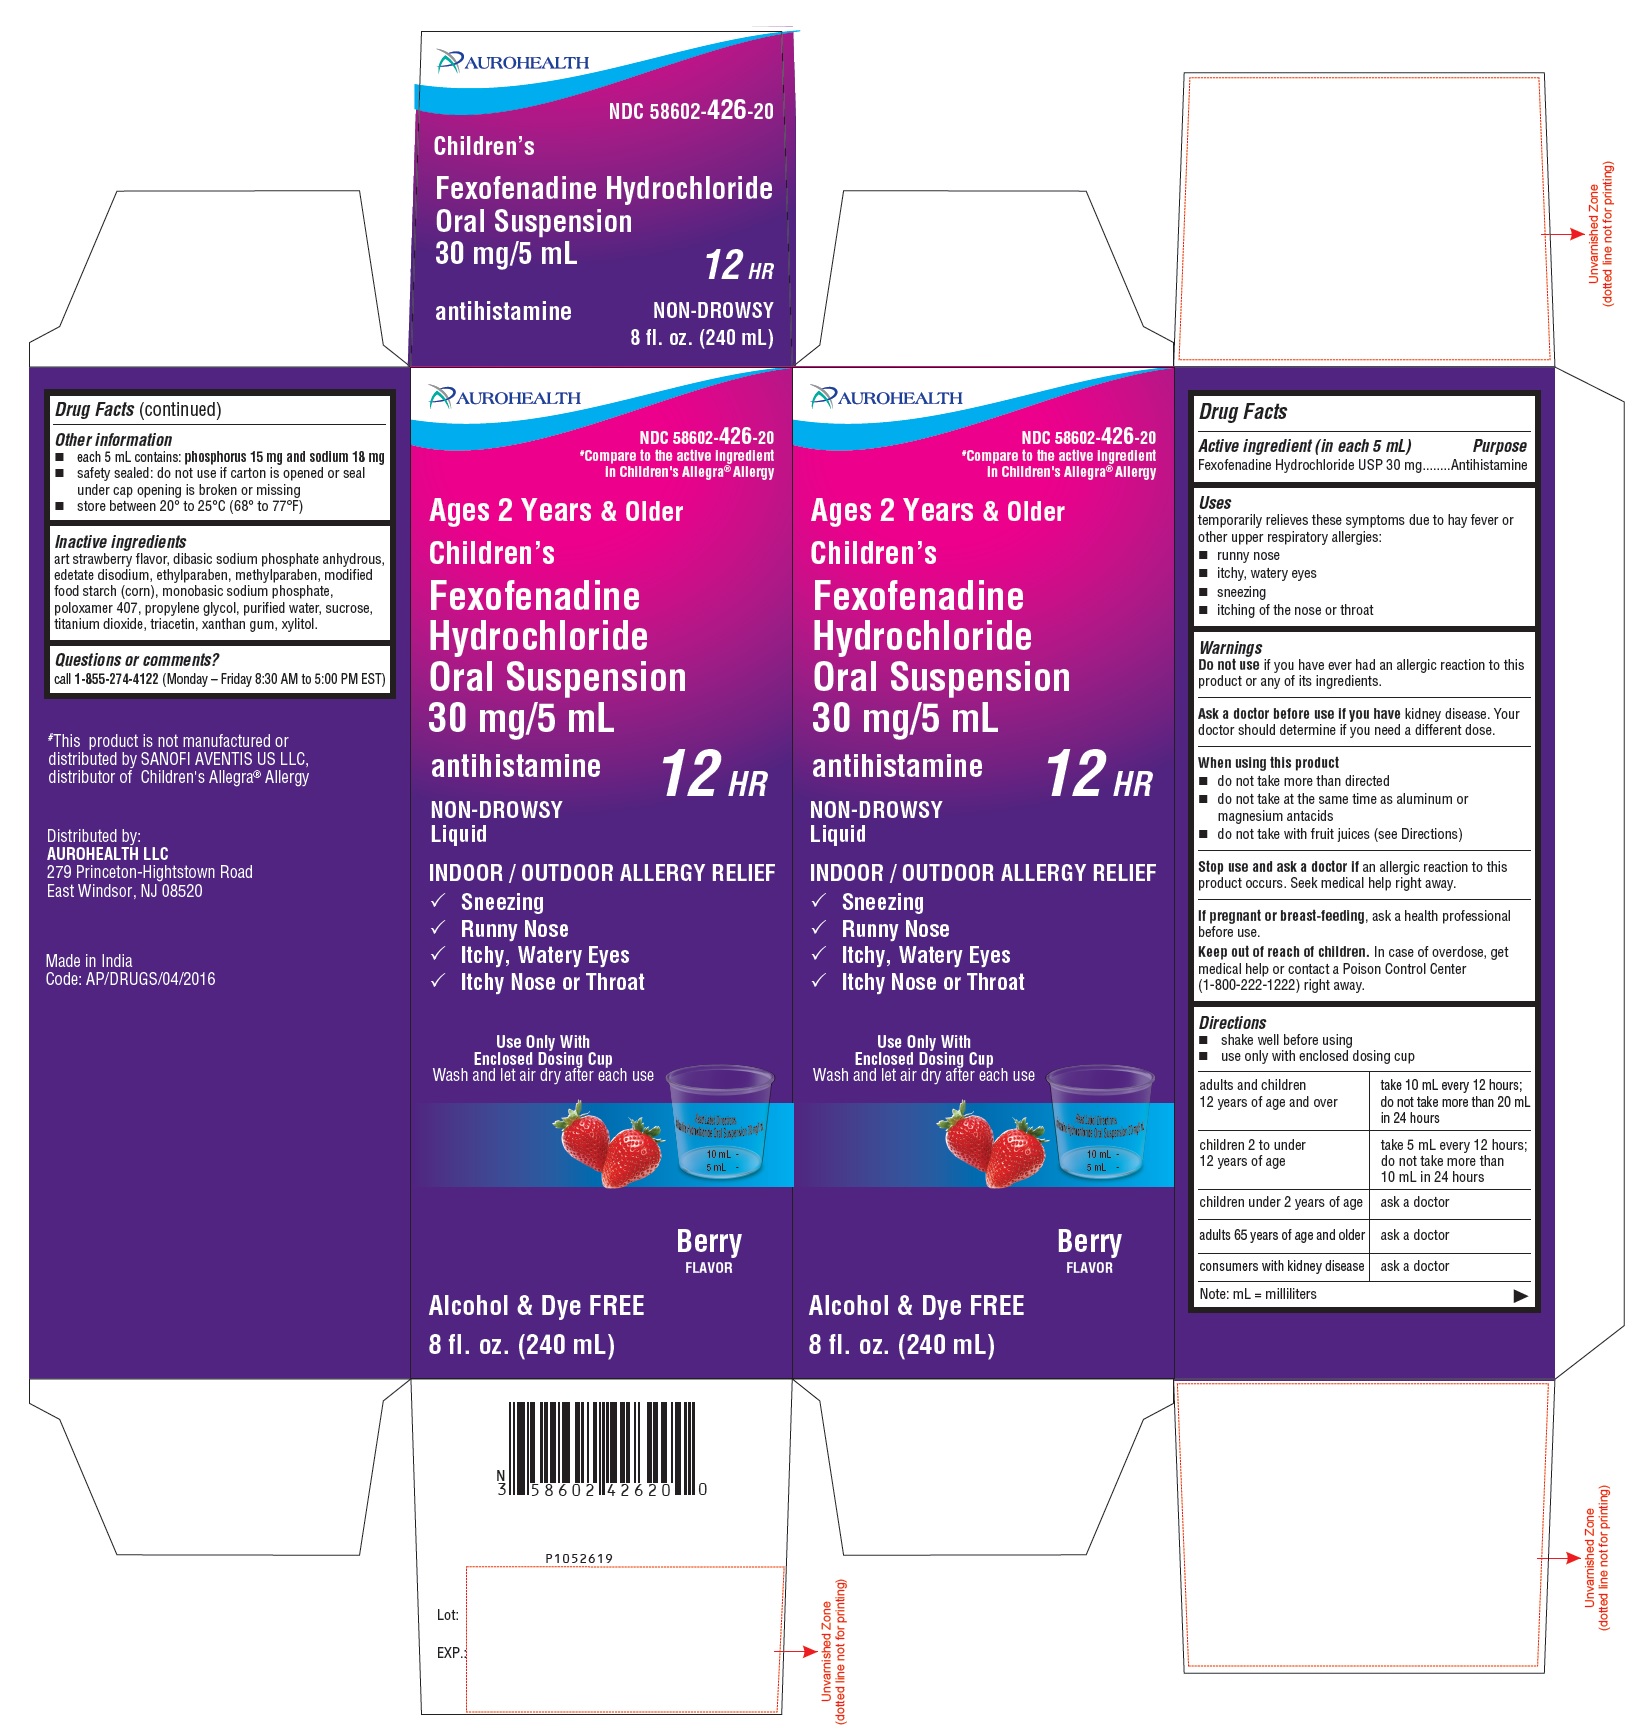 PACKAGE LABEL-PRINCIPAL DISPLAY PANEL - 8 FL OZ Carton Container Label (240 mL Bottle)